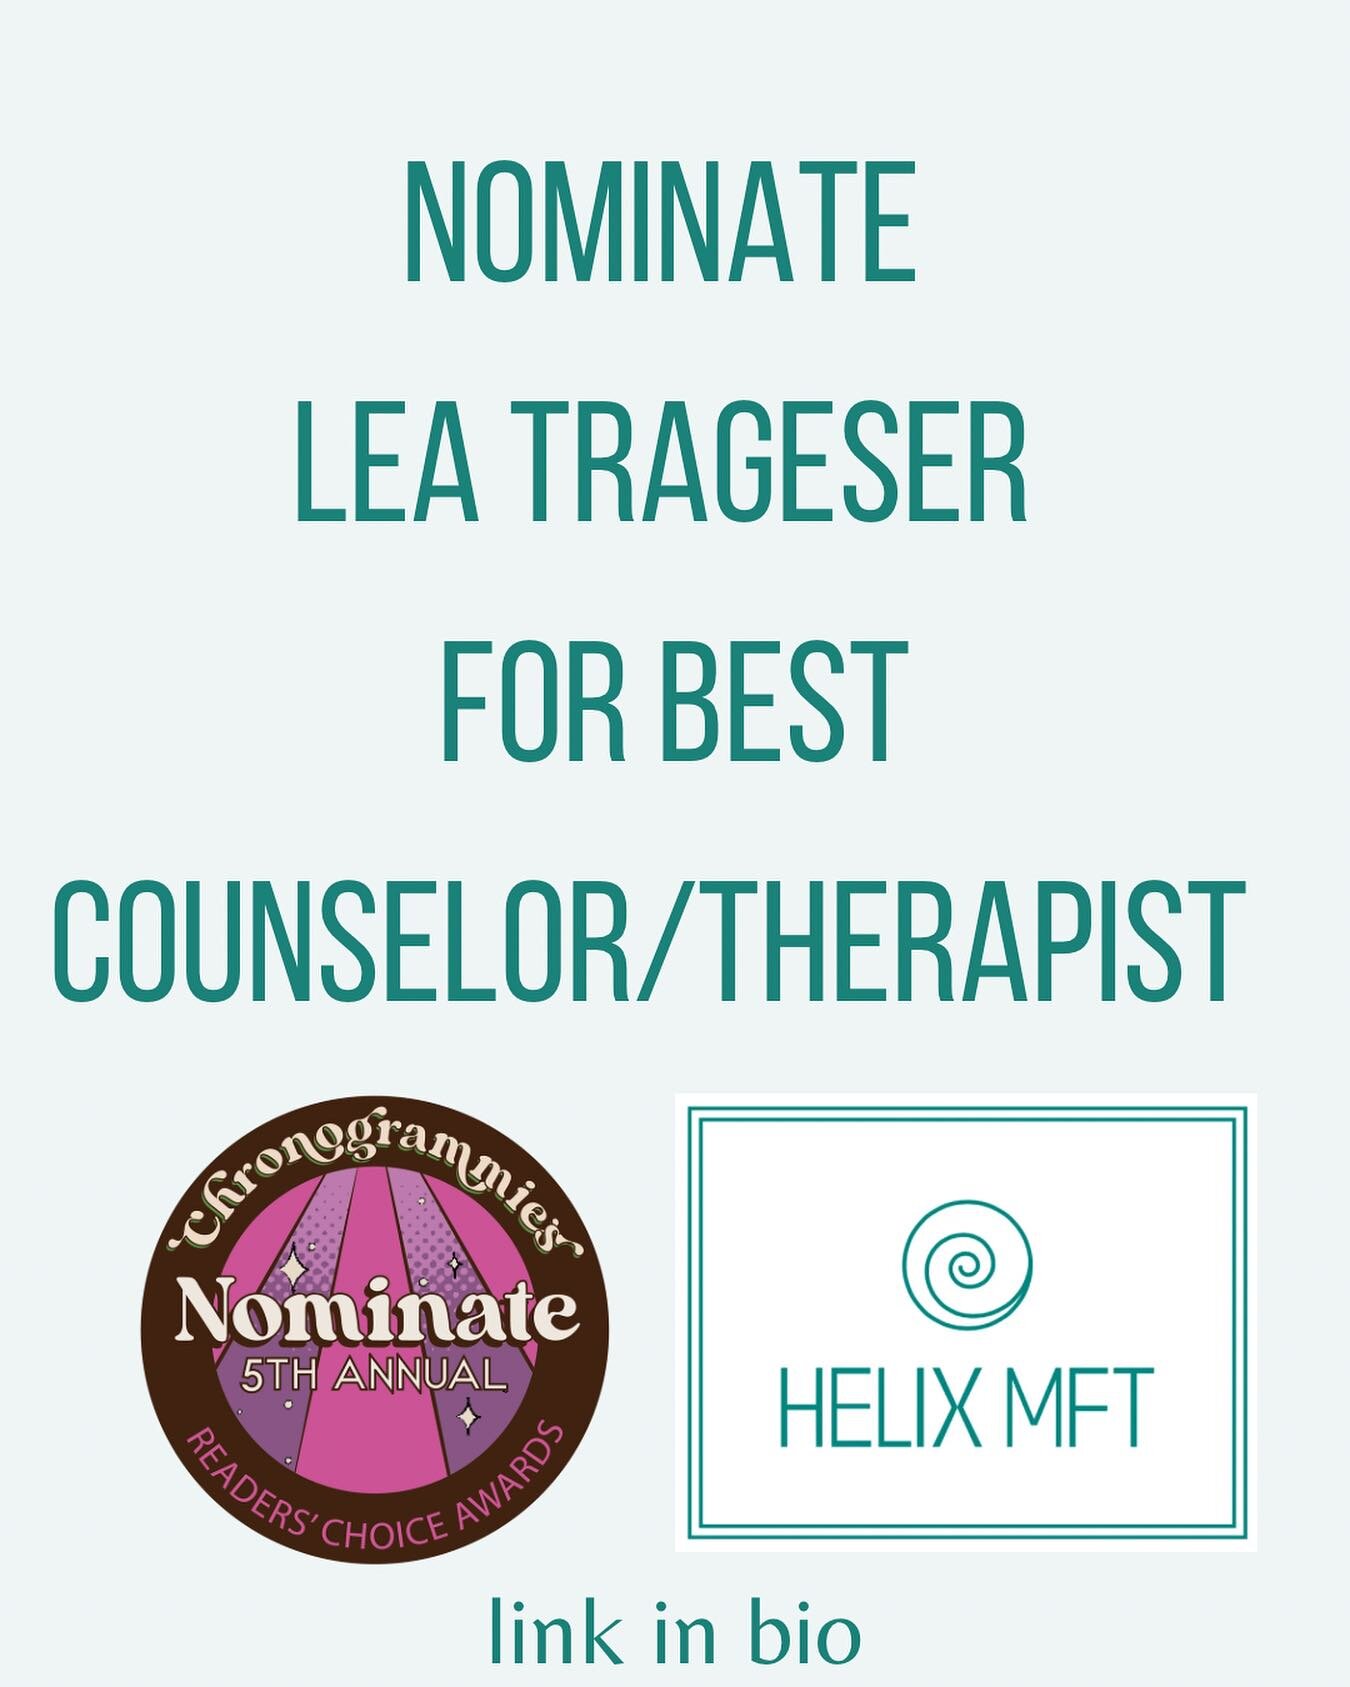 ✨Link in bio!

In 2023 I was so grateful to be voted #1 Therapist/Counselor in the #chronogrammies 

Nominations for 2024 are open through 2/15 and your support is SO appreciated! 

🌀Learn more at helixmft.com

Disclaimer: this post is for education